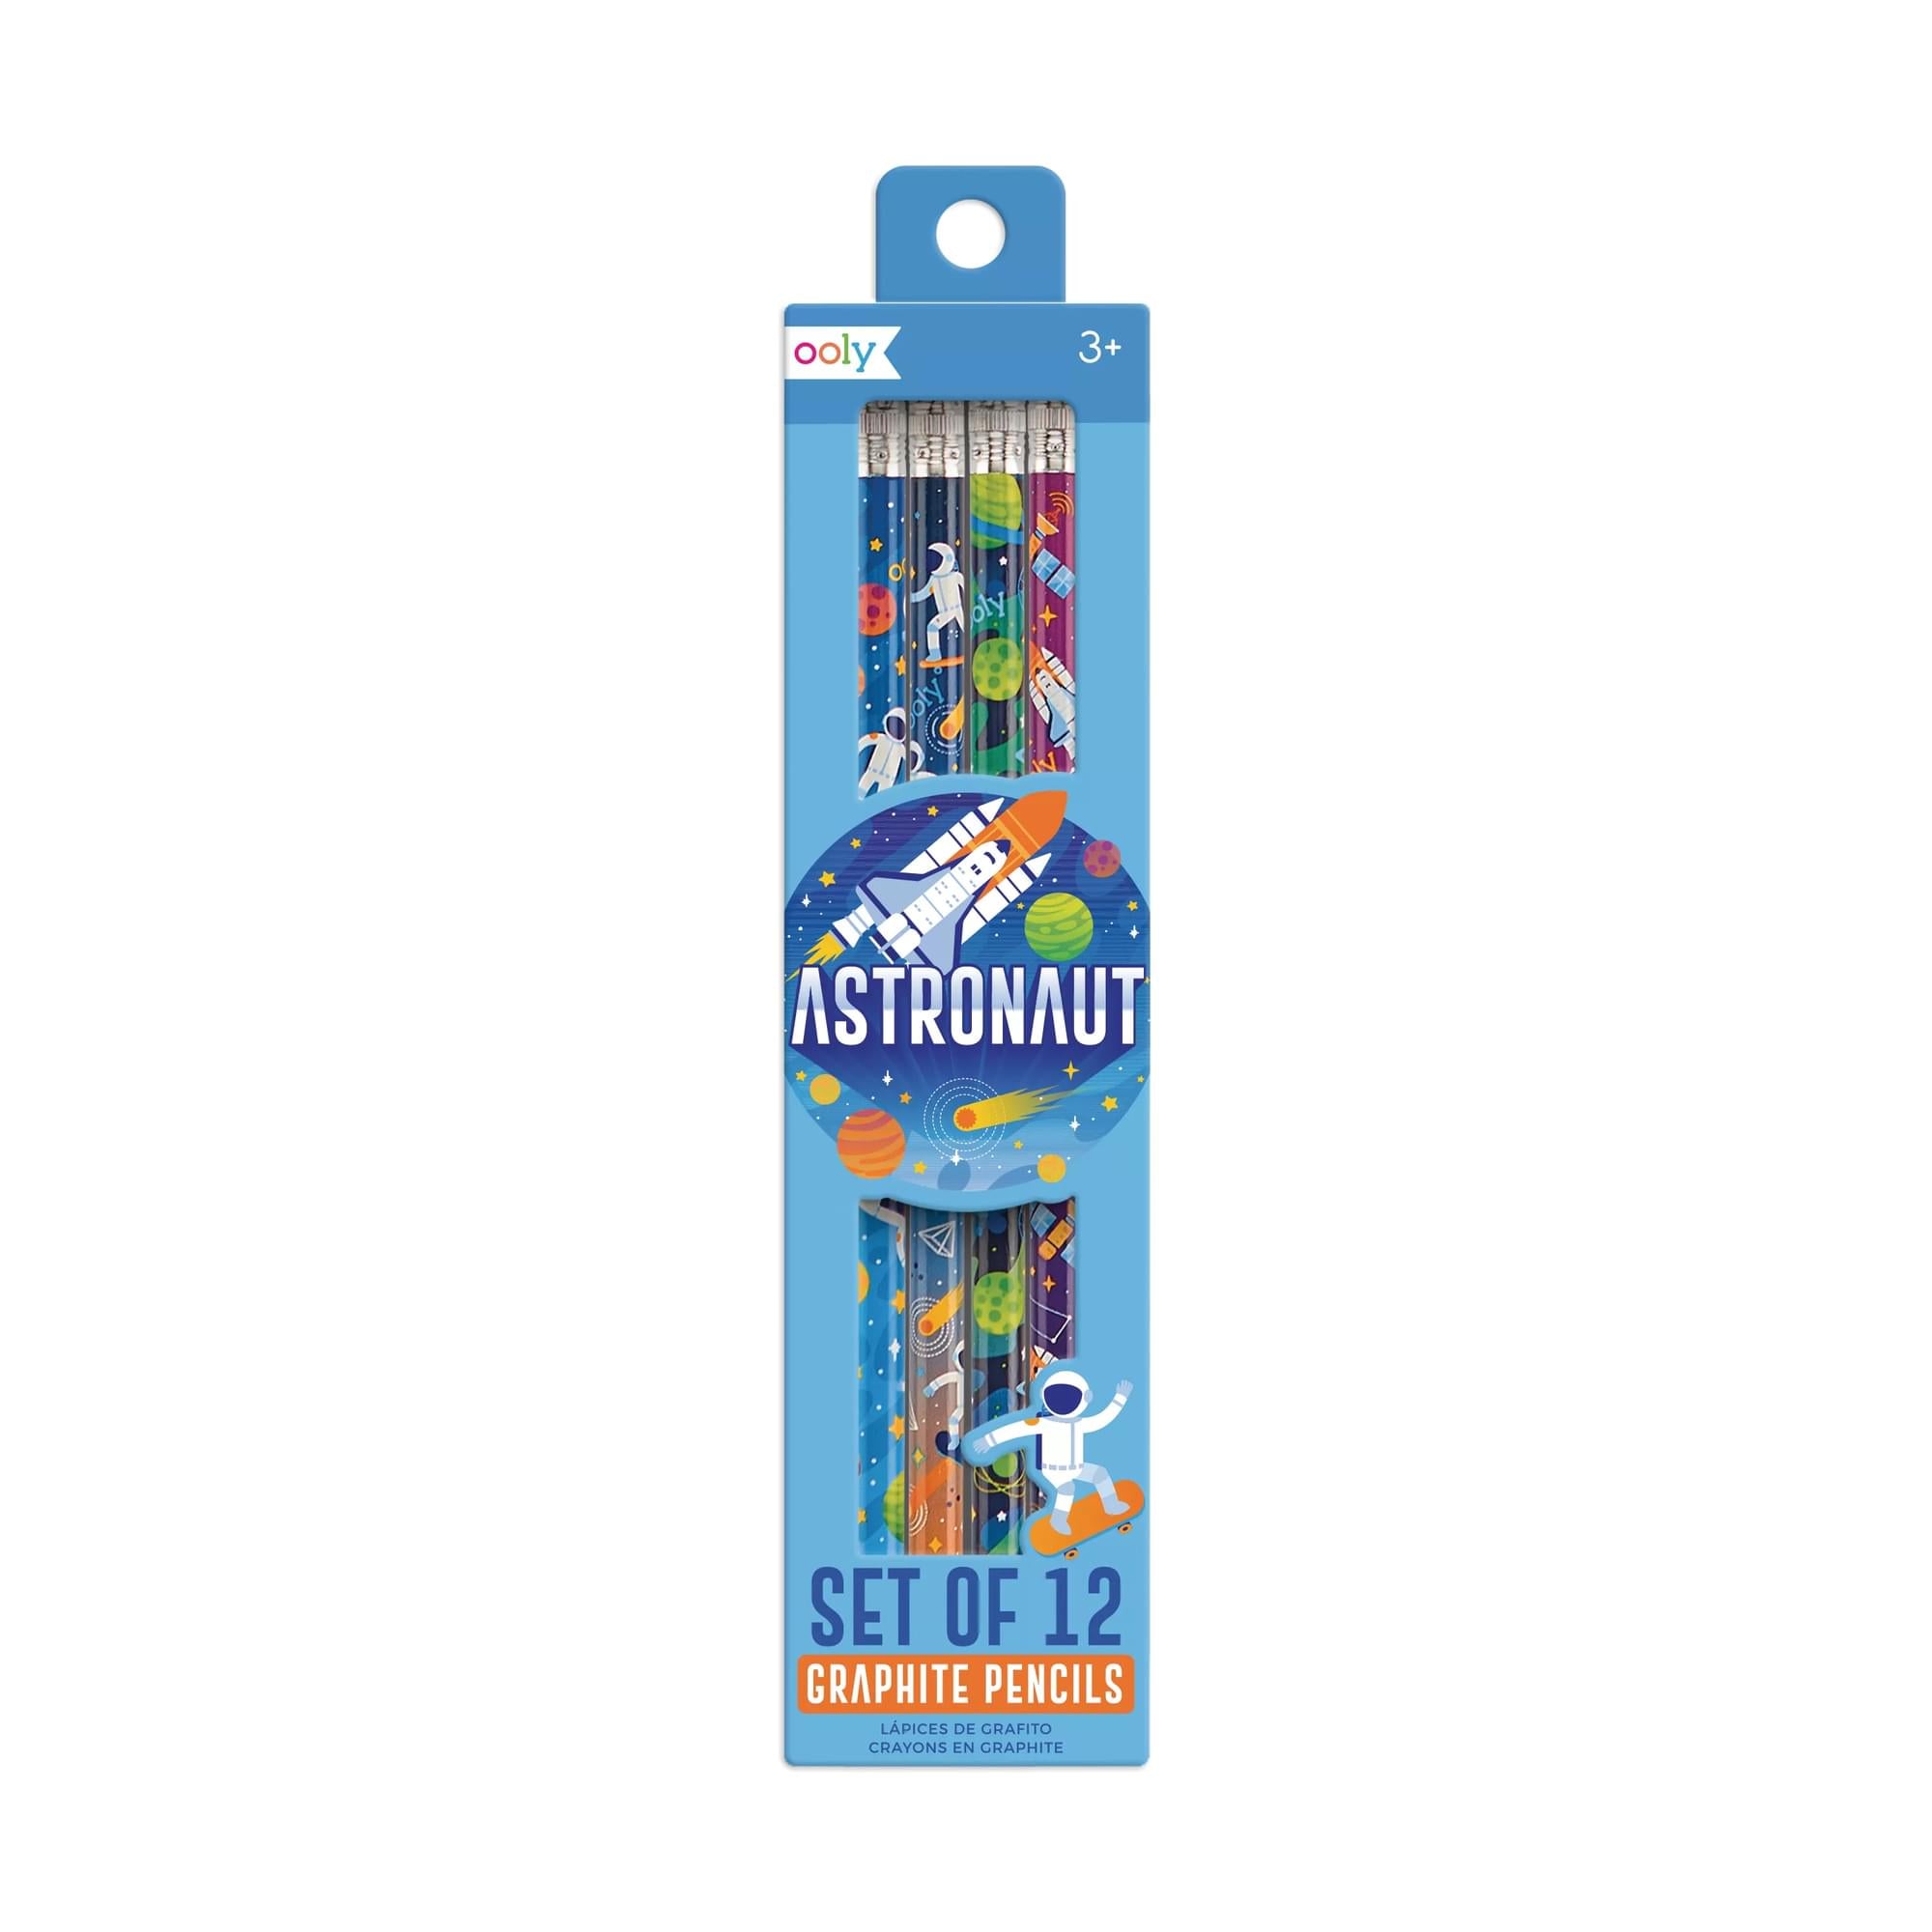 OOLY Astronaut Graphite Pencils in product packaging